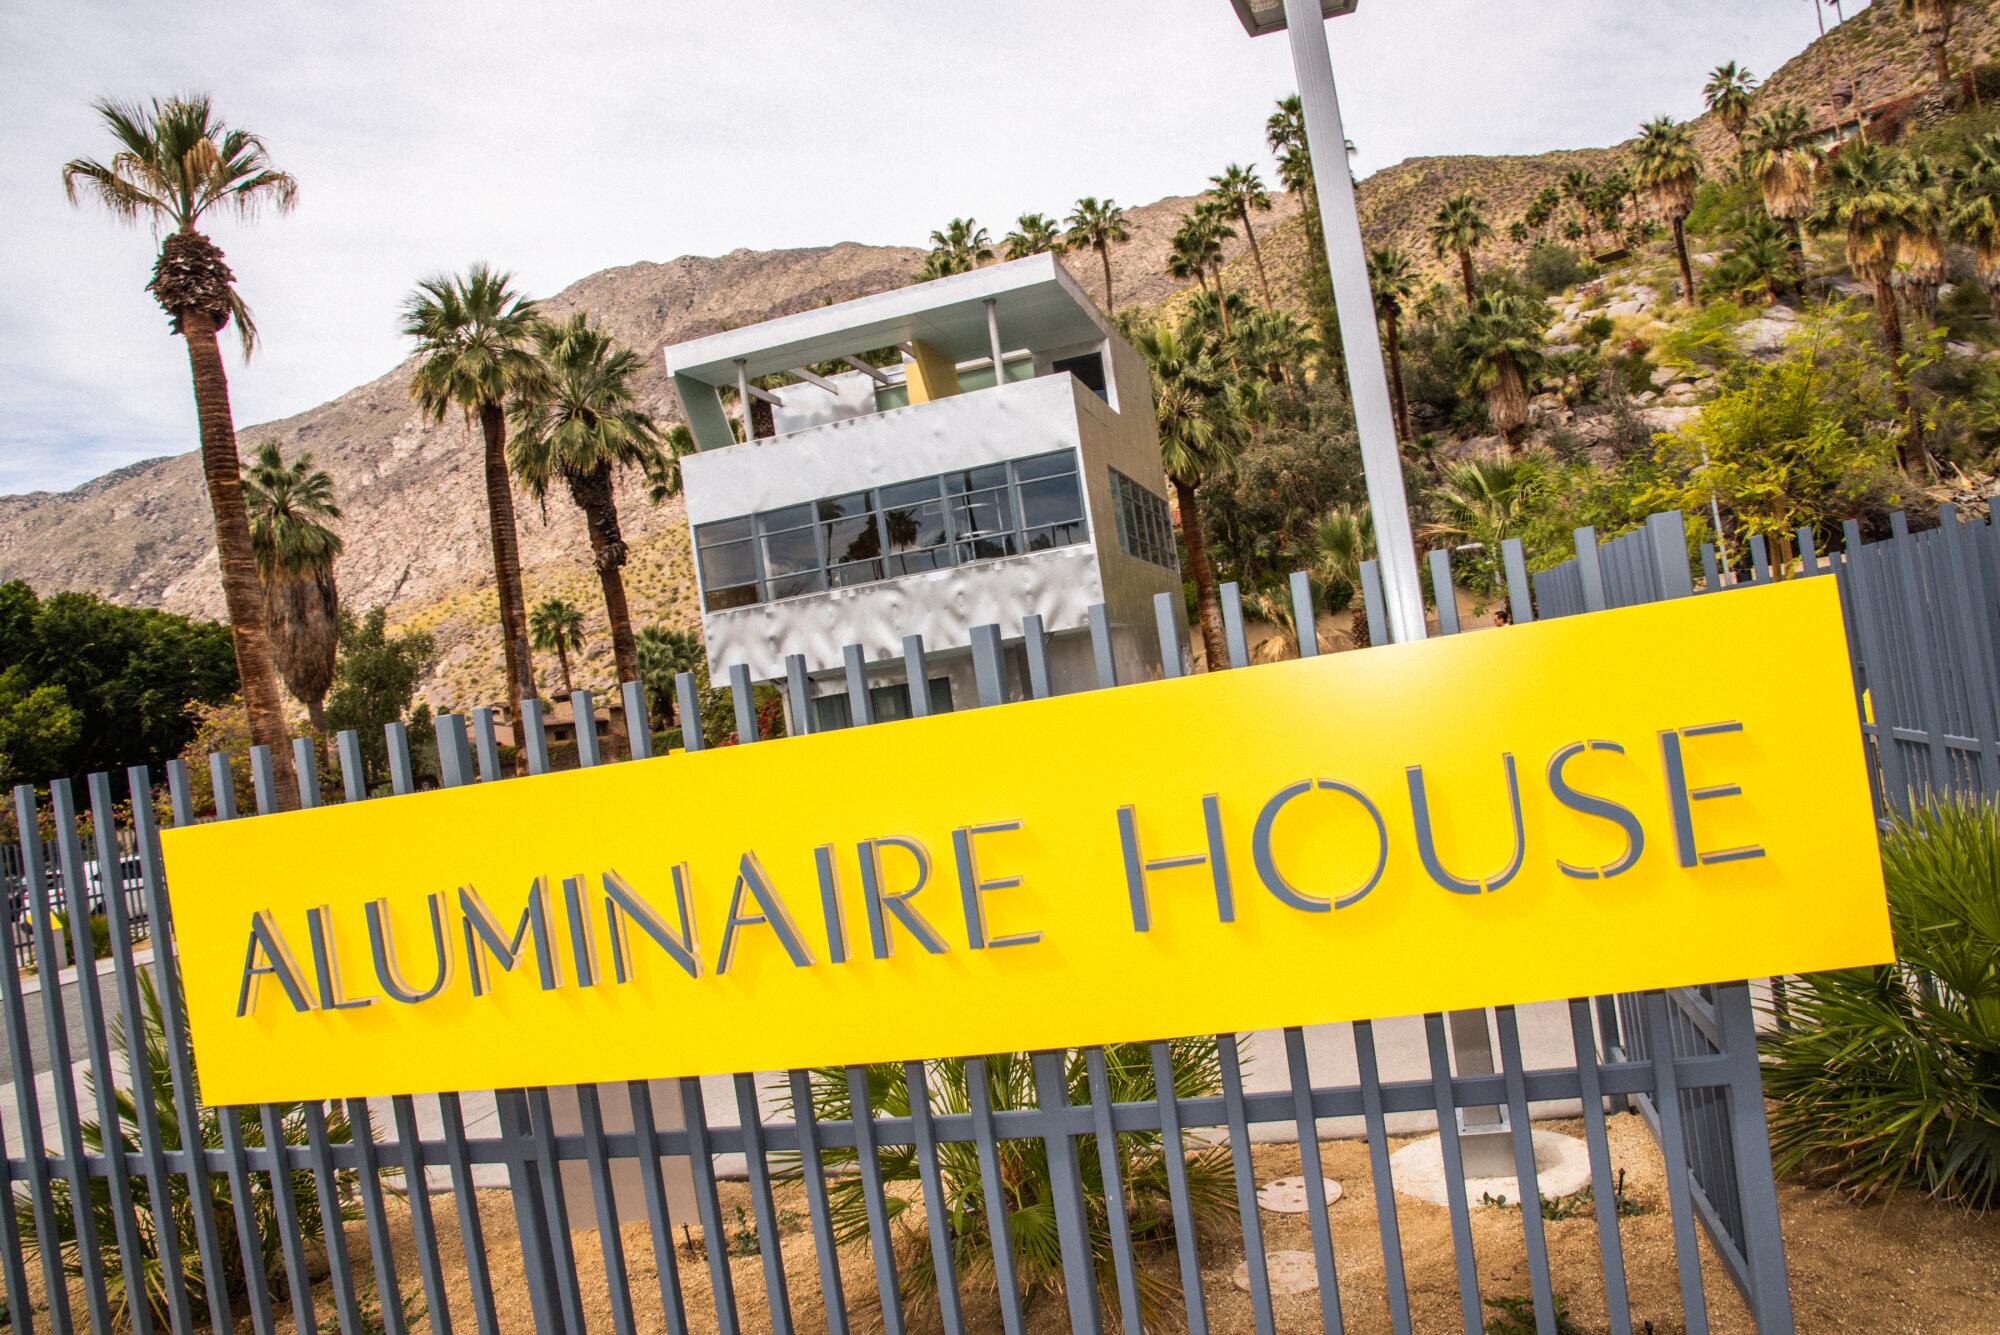 The Aluminaire House at Palm Springs Art Museum.